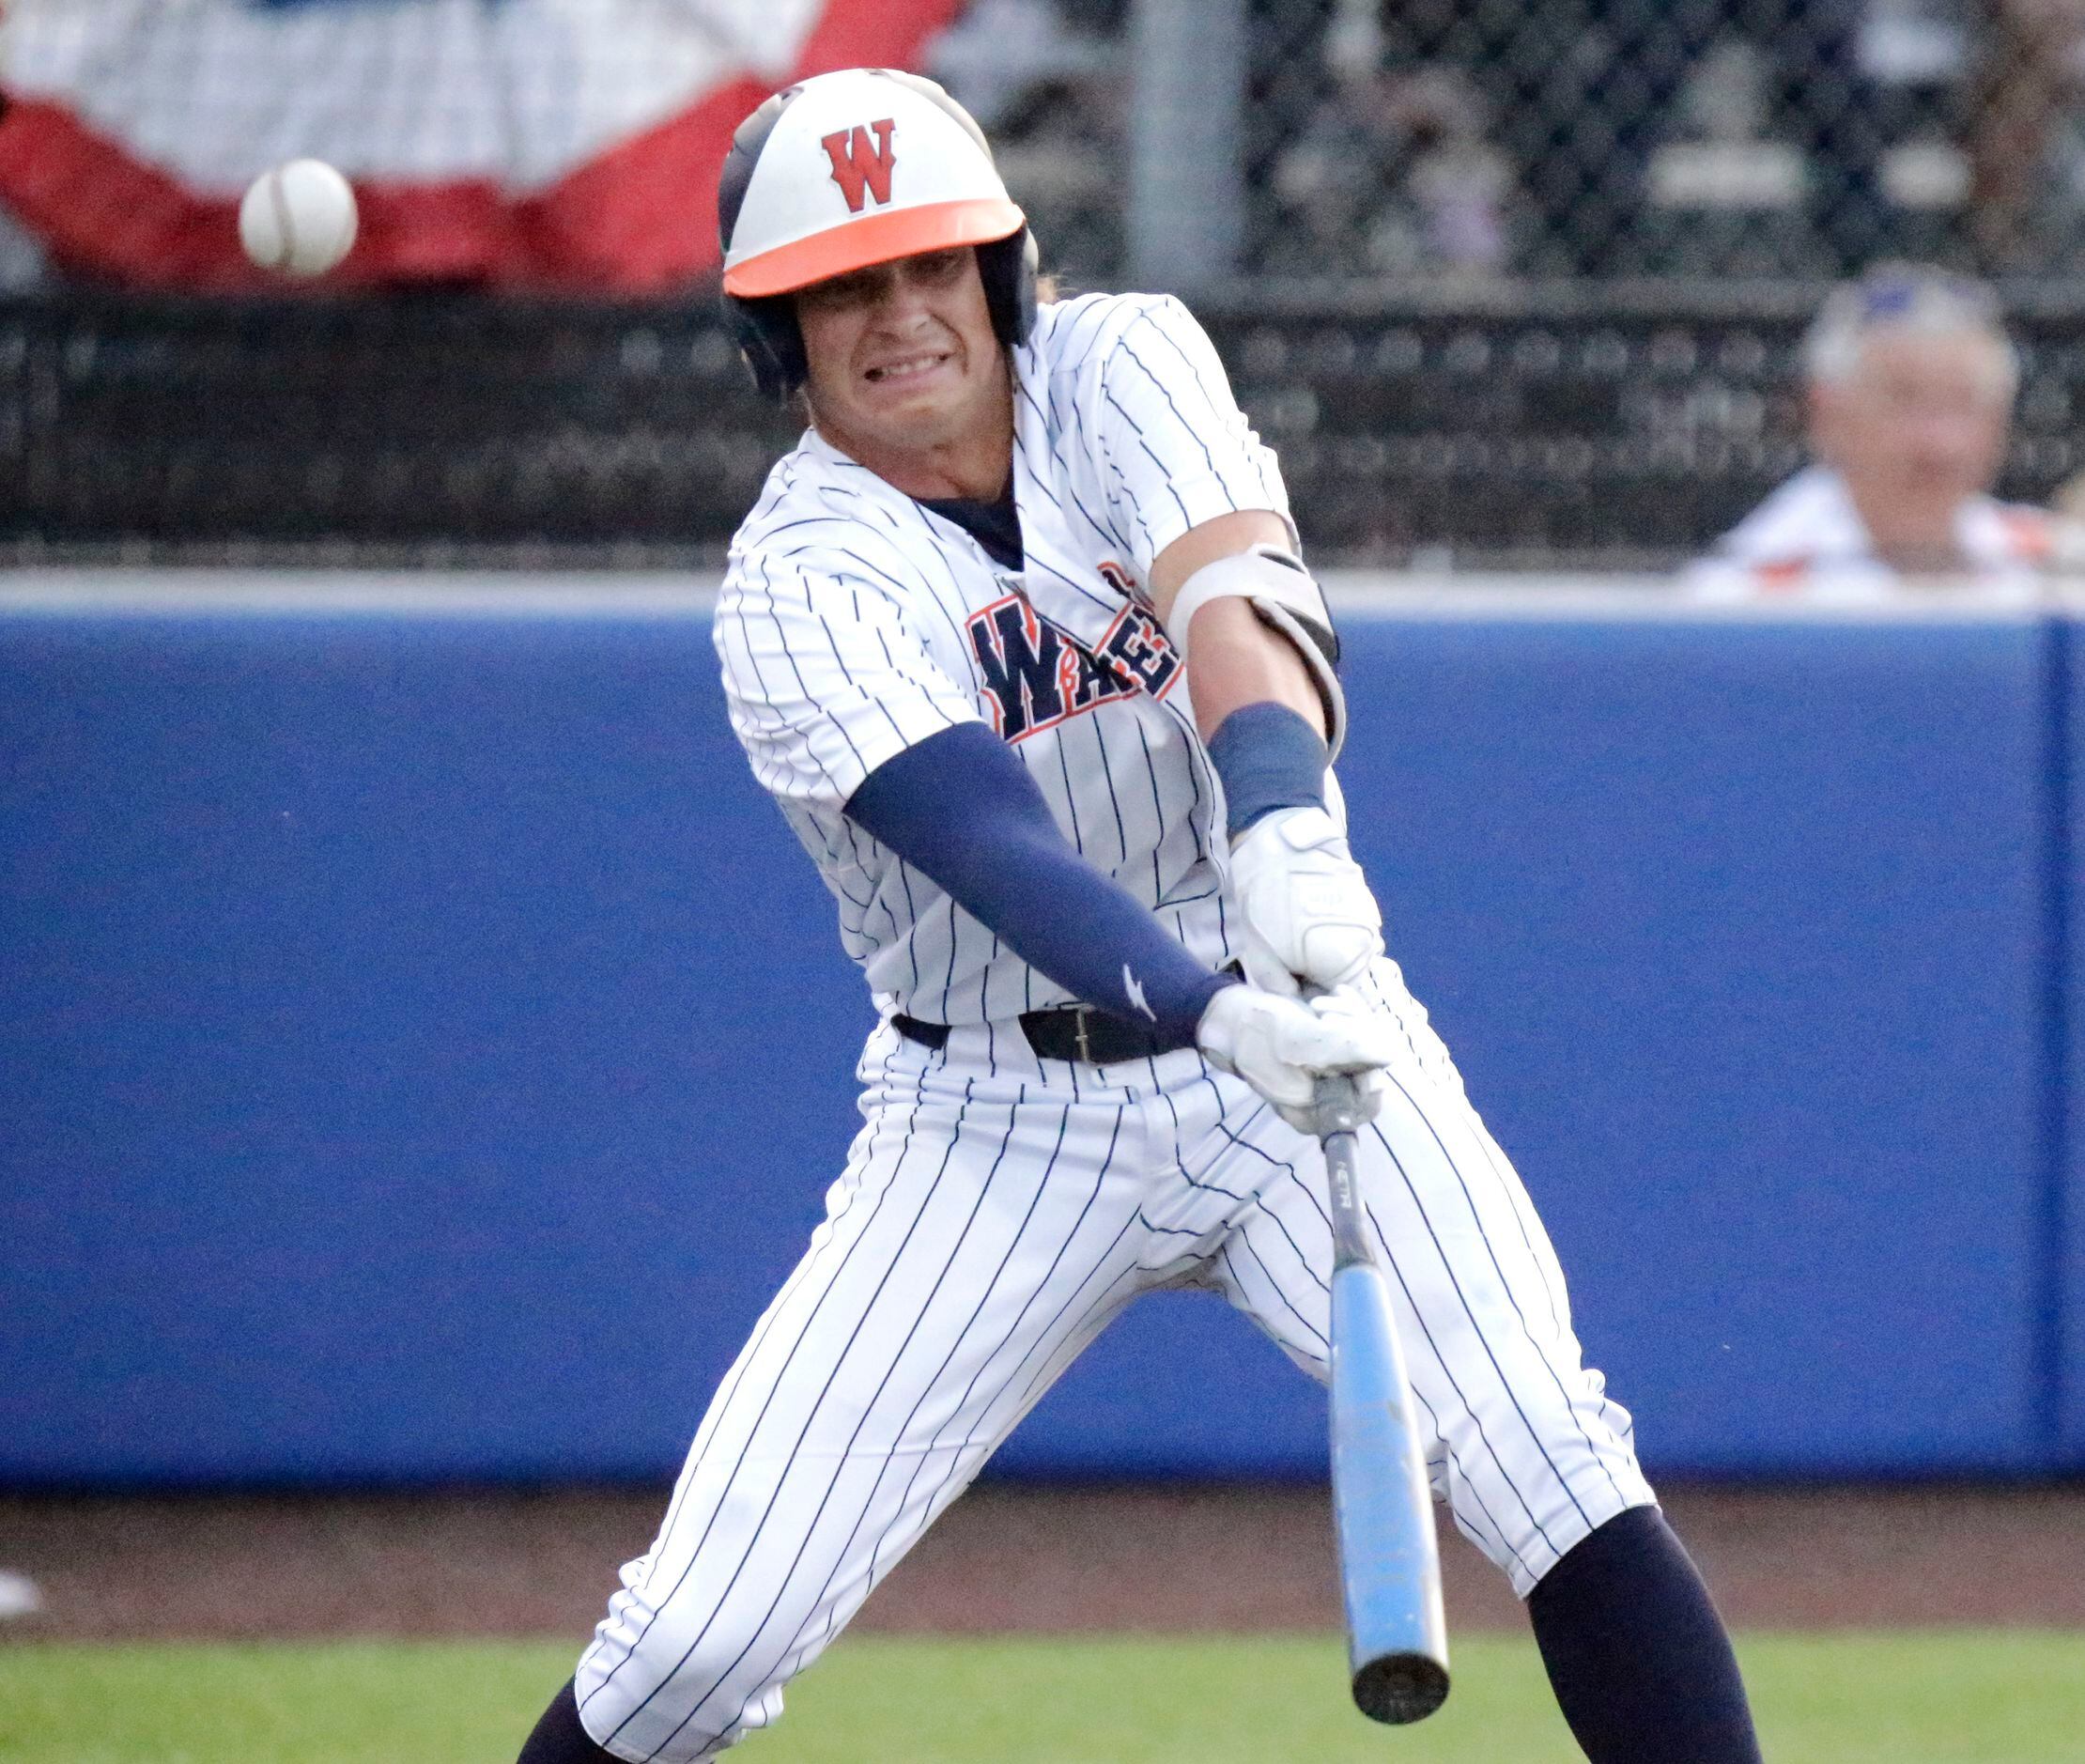 Wakeland High School right fielder Brennan Myer (19) foul tips a pitch in the second inning...